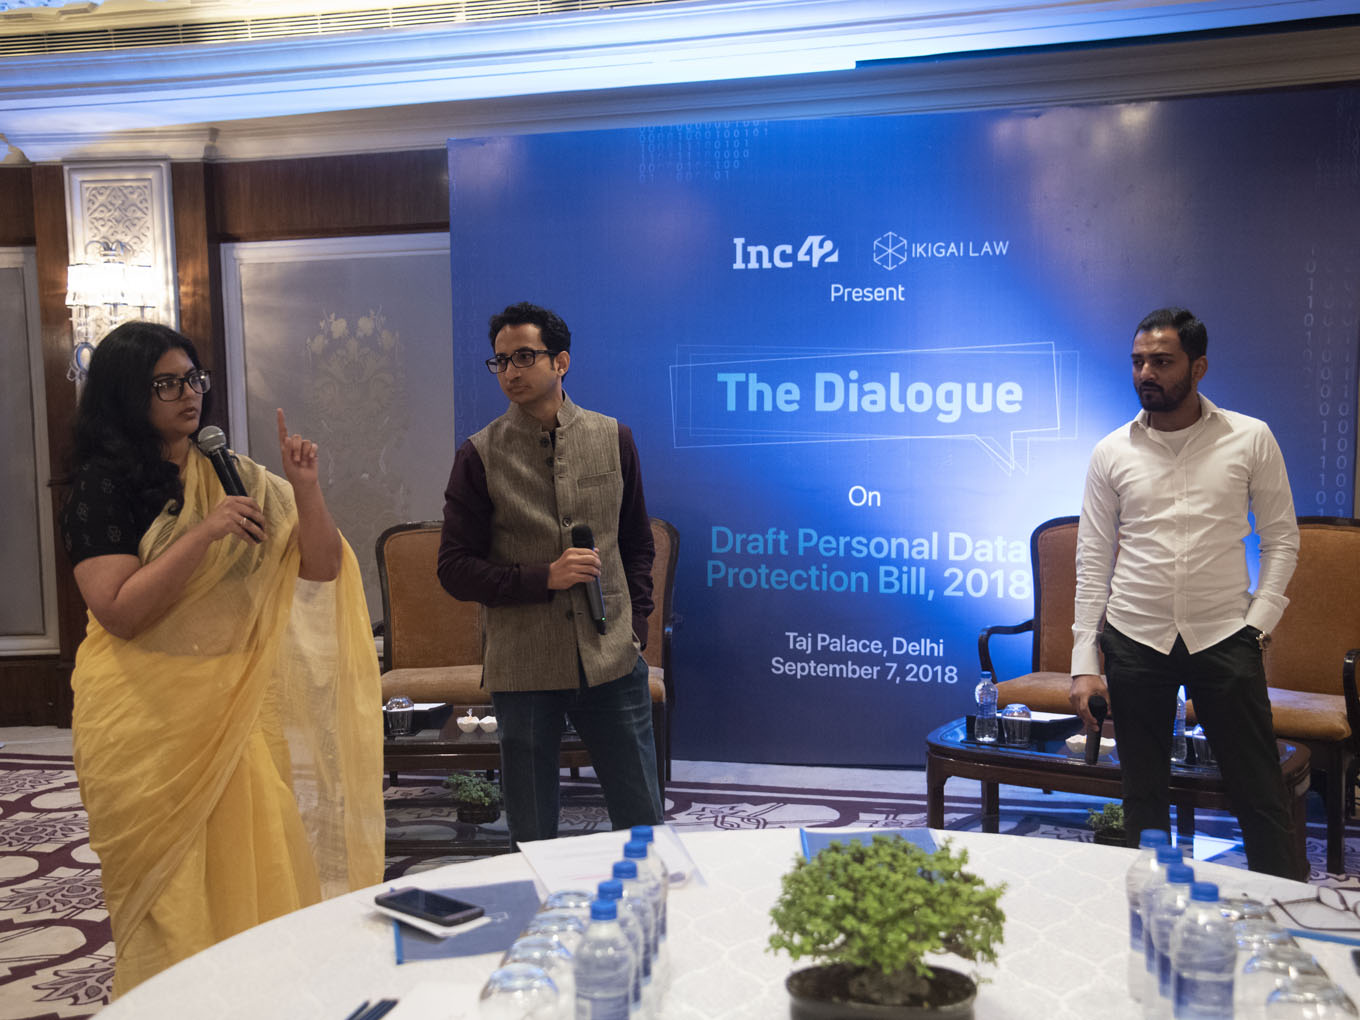 The Dialogue—Preparing Indian Startups For The Personal Data Protection Bill